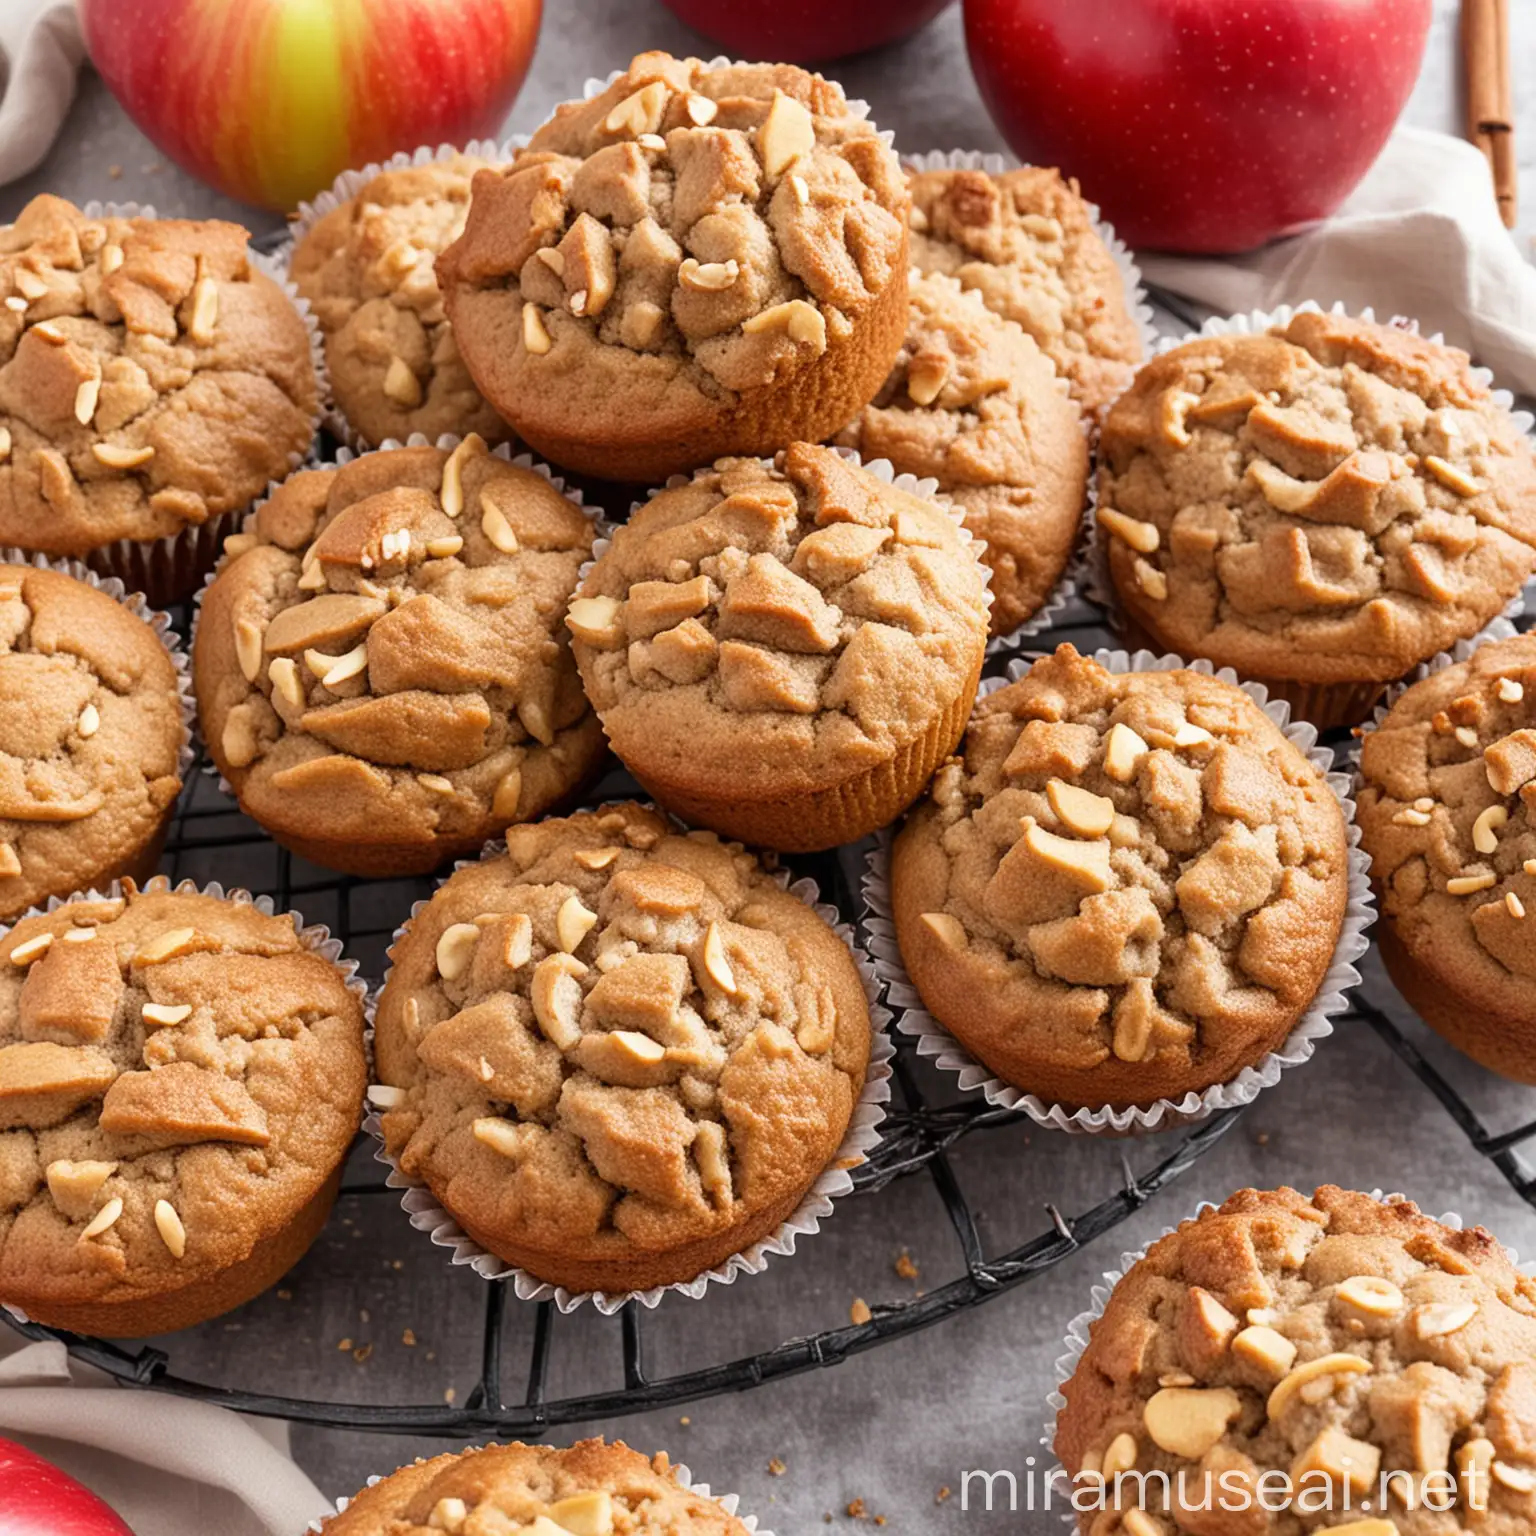 Homemade Apple Cinnamon Muffins Delicious Freshly Baked Treats